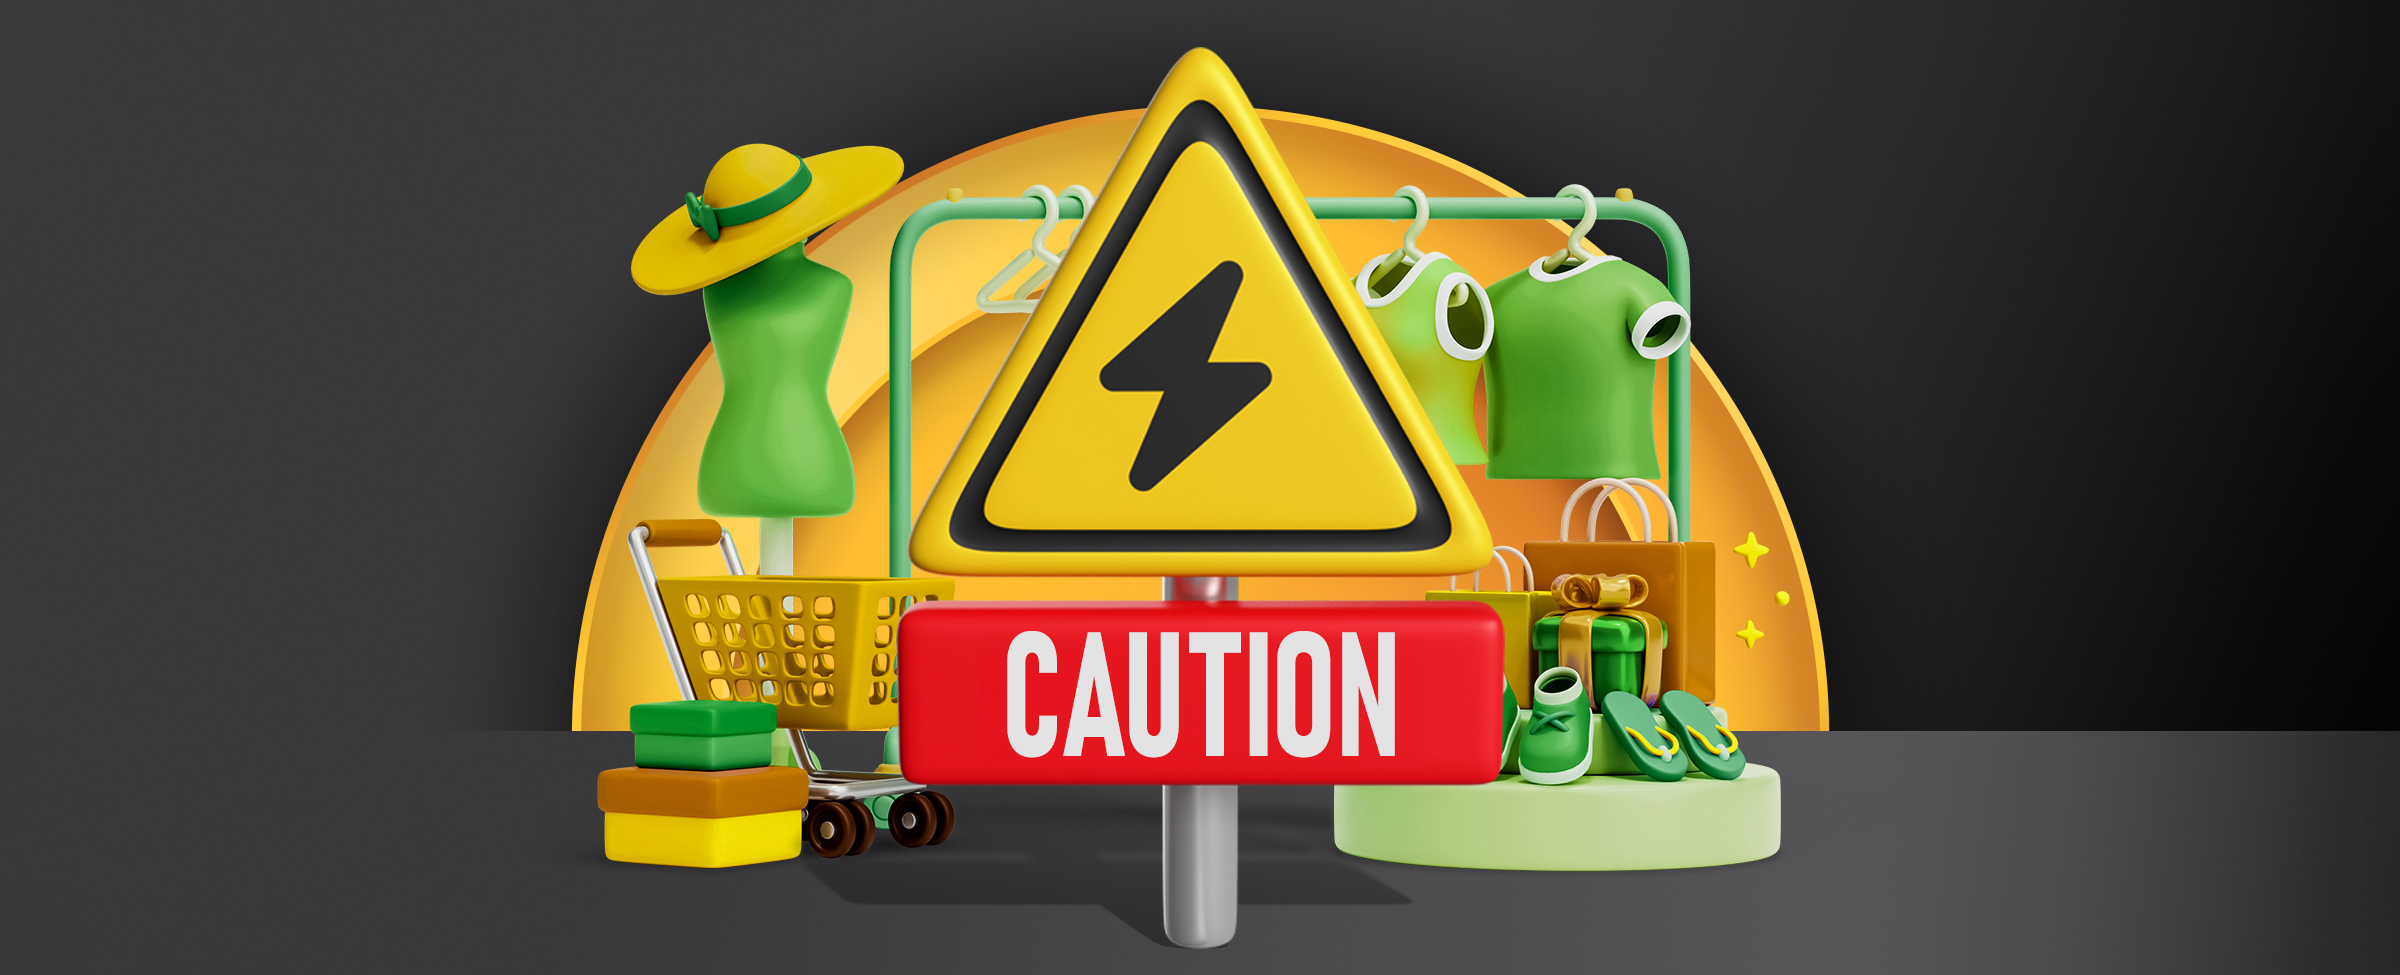 A yellow sign with the text ‘Caution’ displayed is centred surrounded by retail items. On a two-tone dark background.